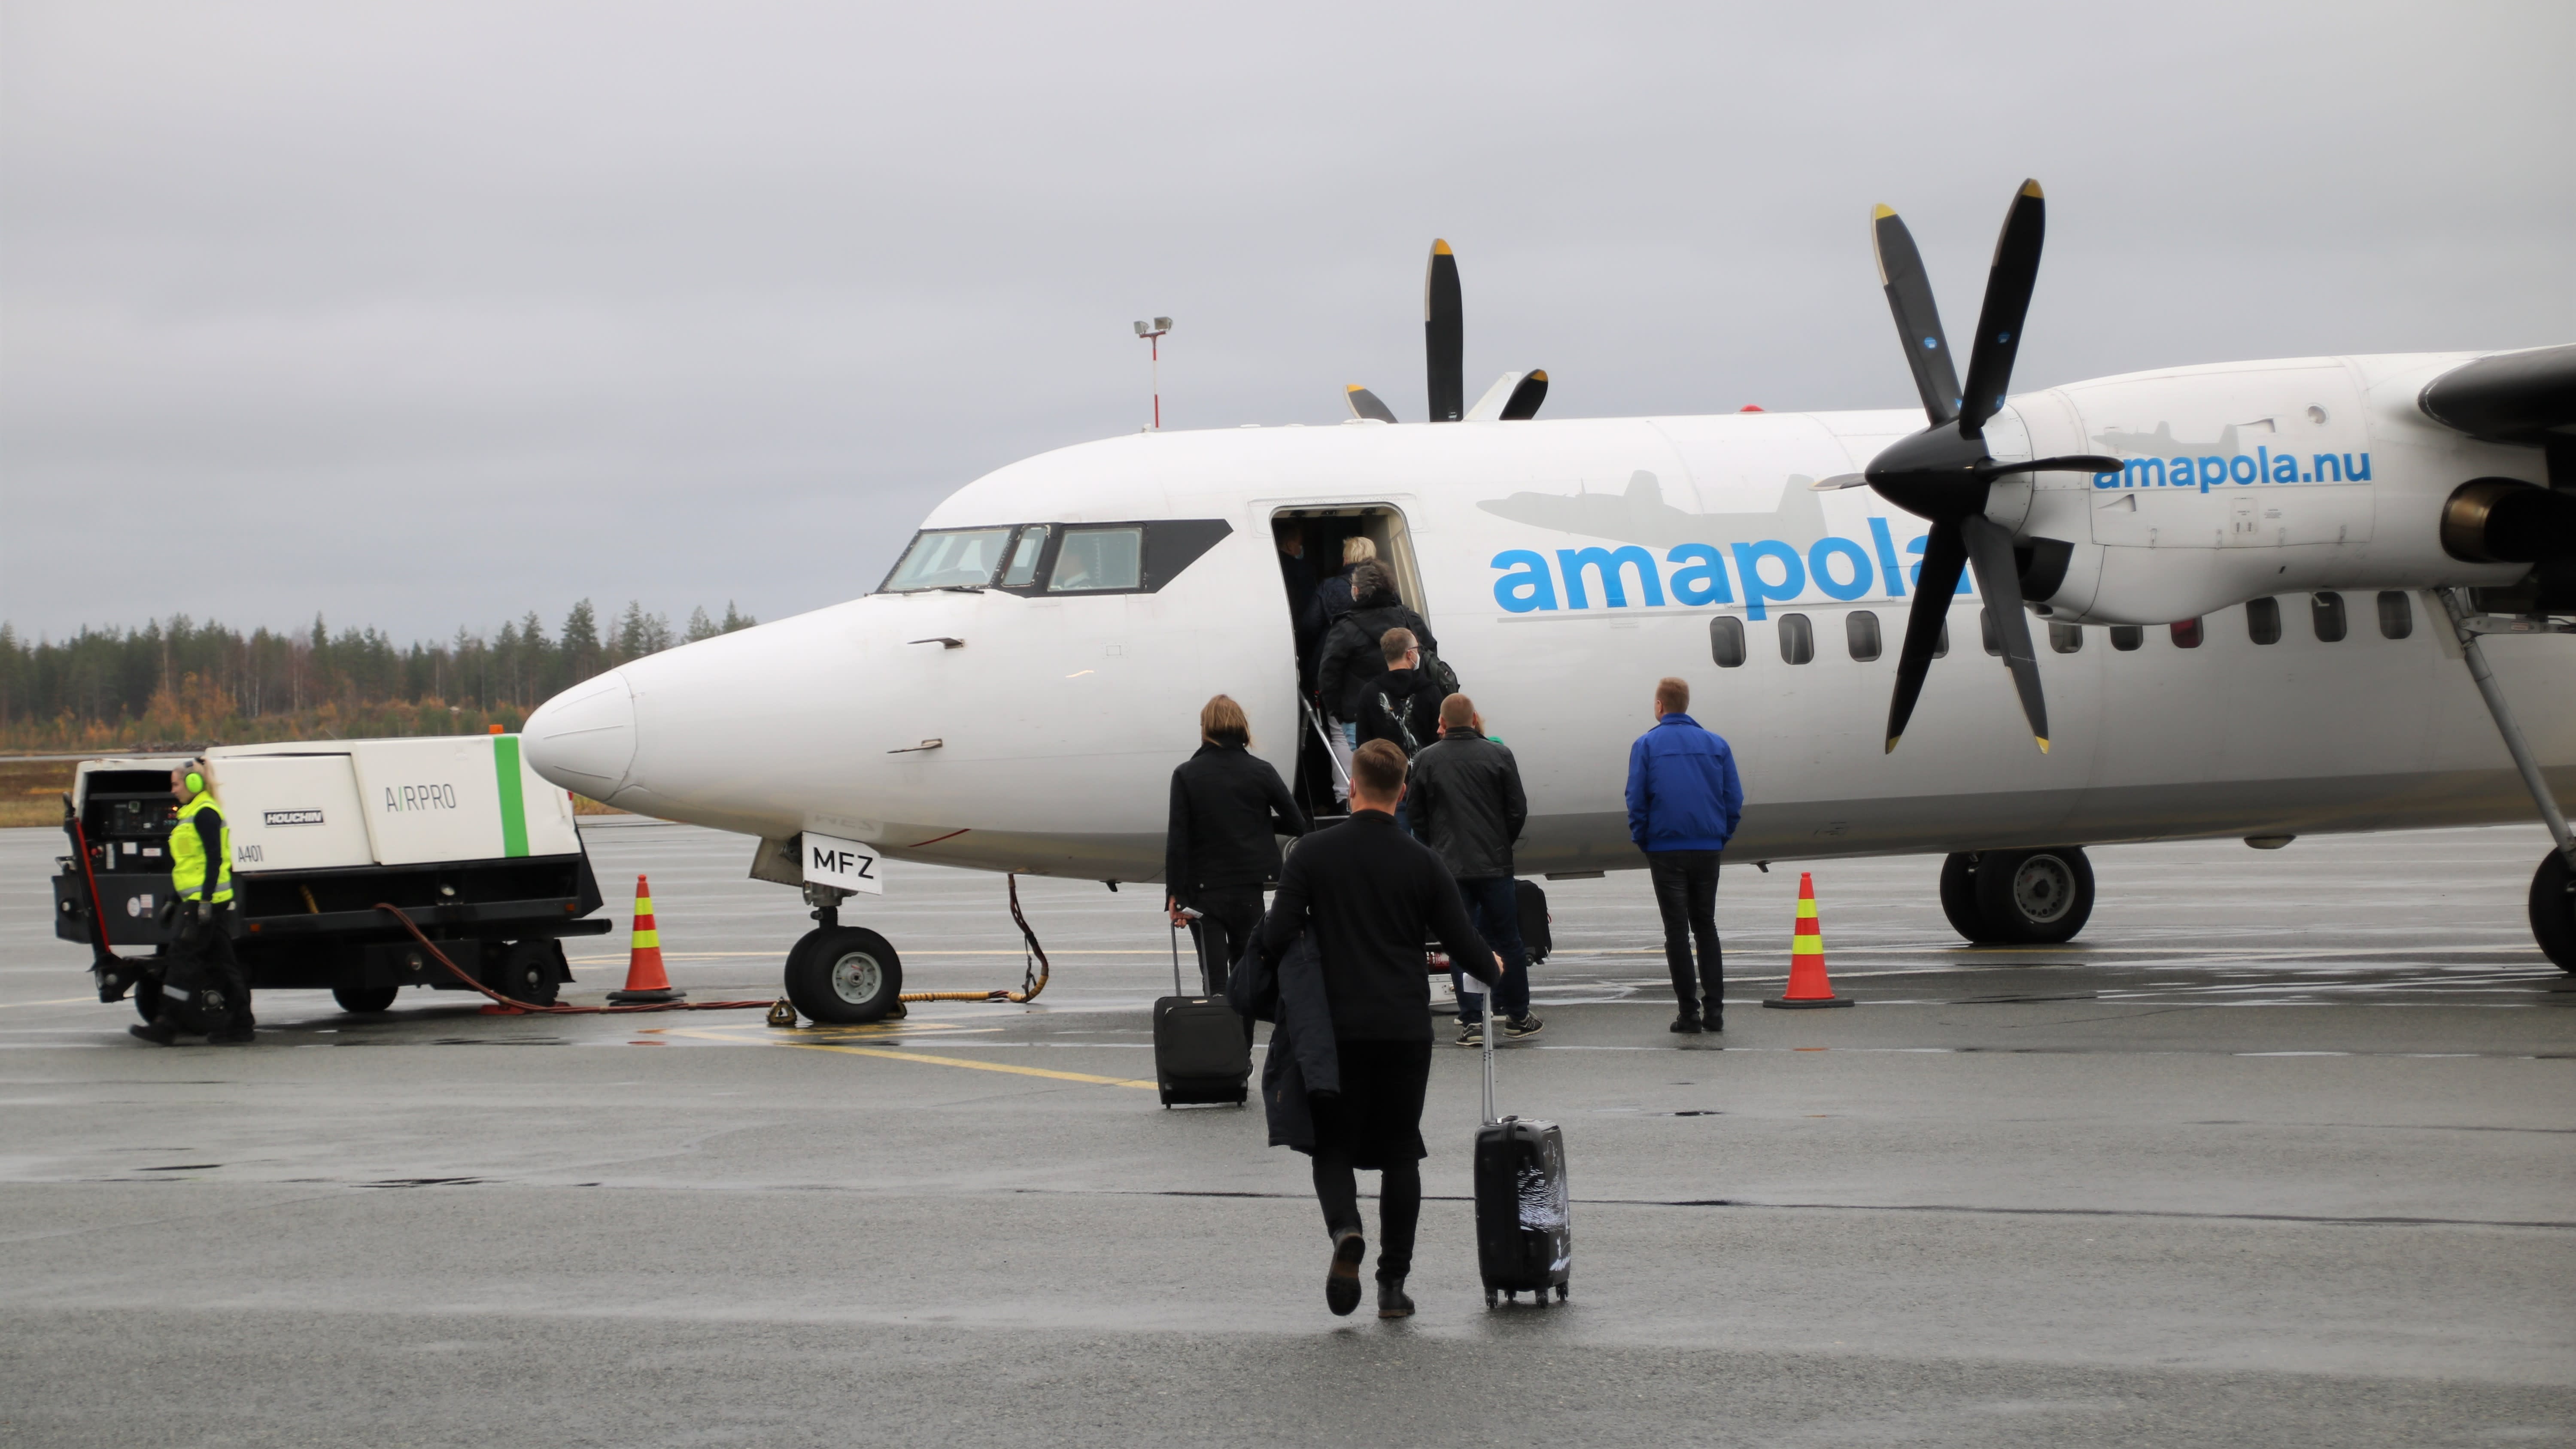 The security guard is investigating the take-off accident at Helsinki-Vantaa Airport